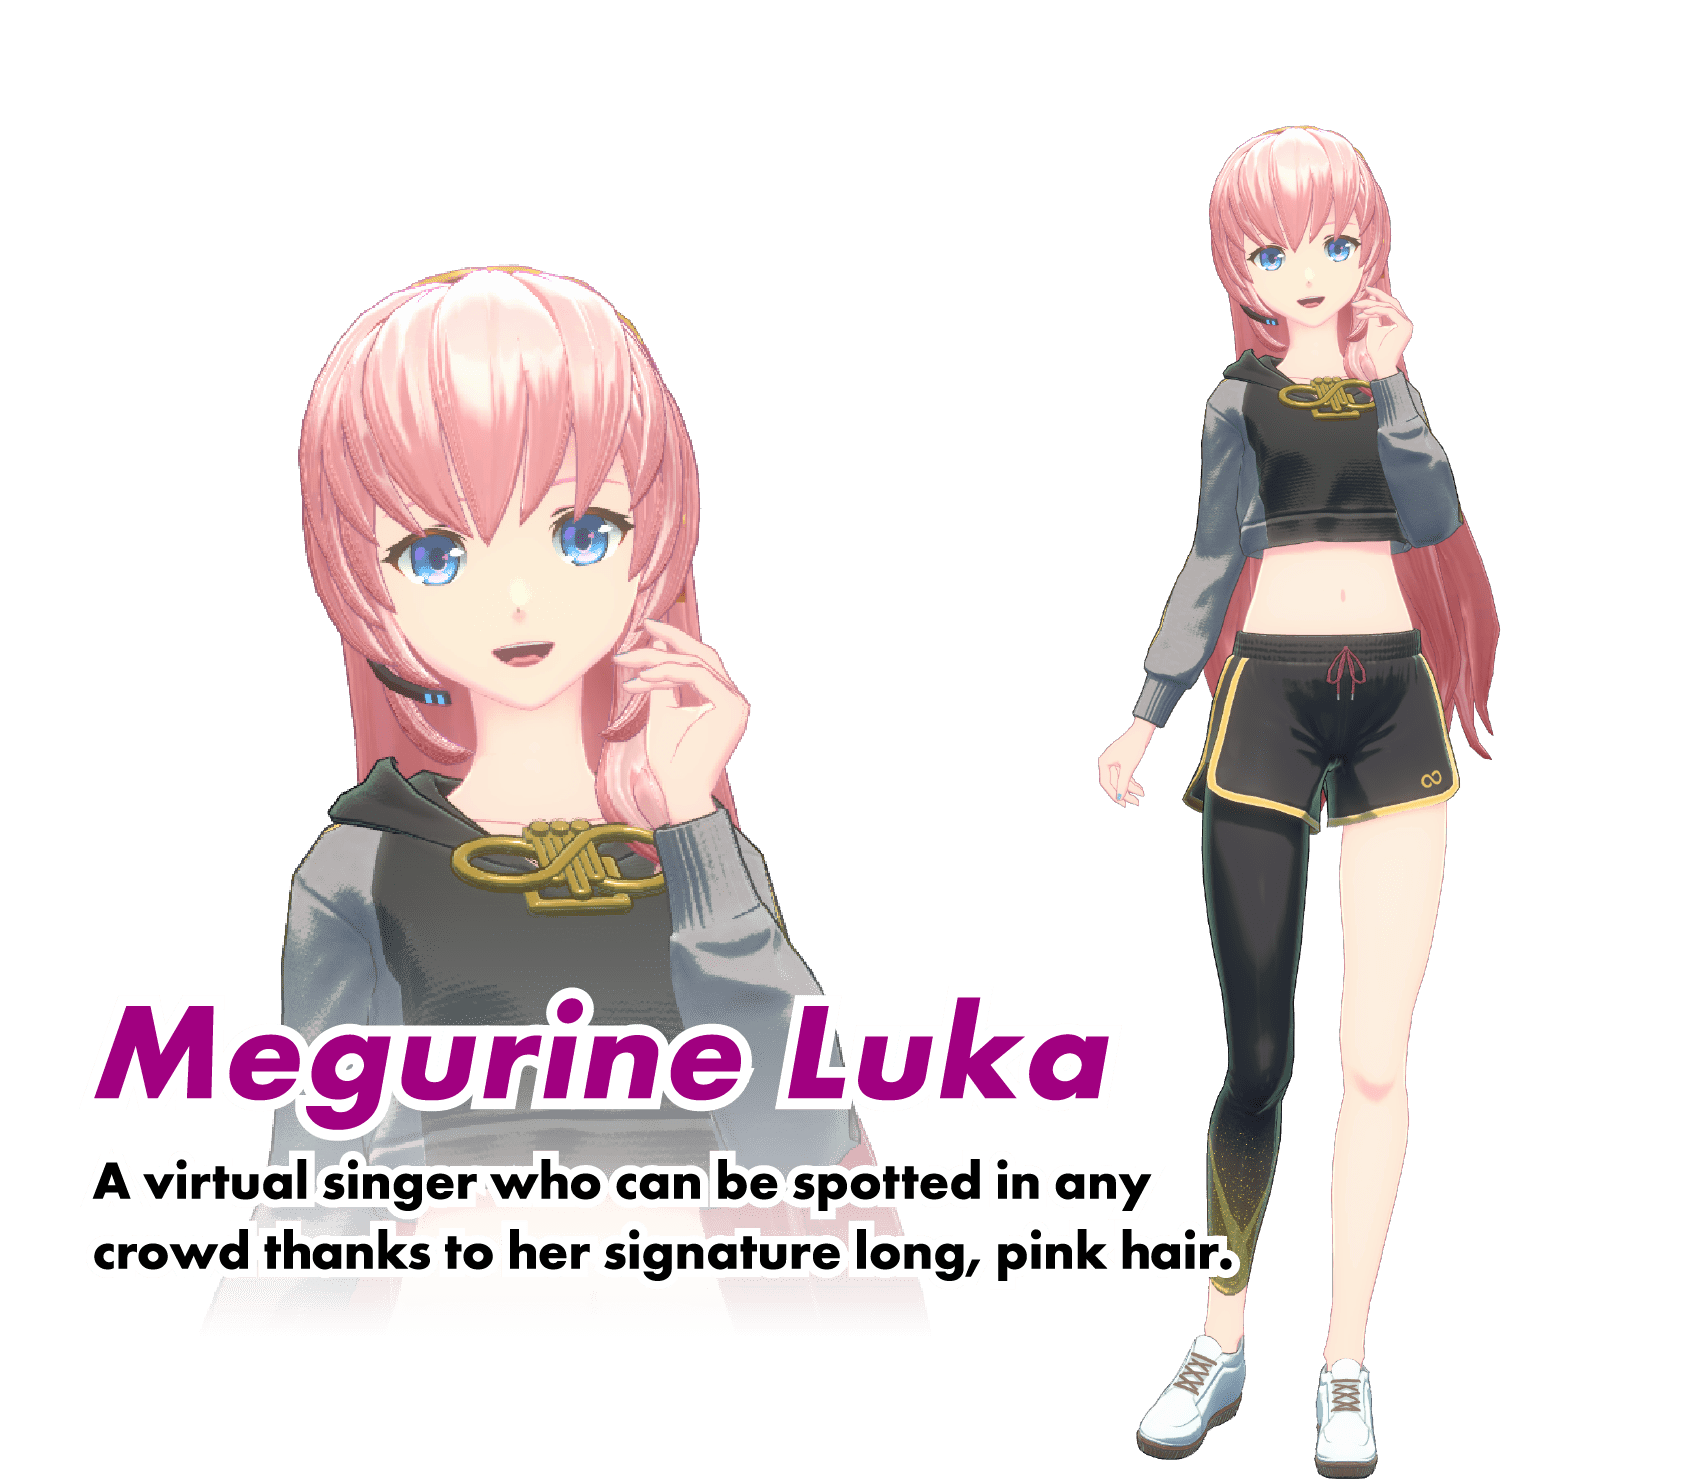 Megurine Luka:A virtual singer who can be spotted in any crowd thanks to her signature long, pink hair.